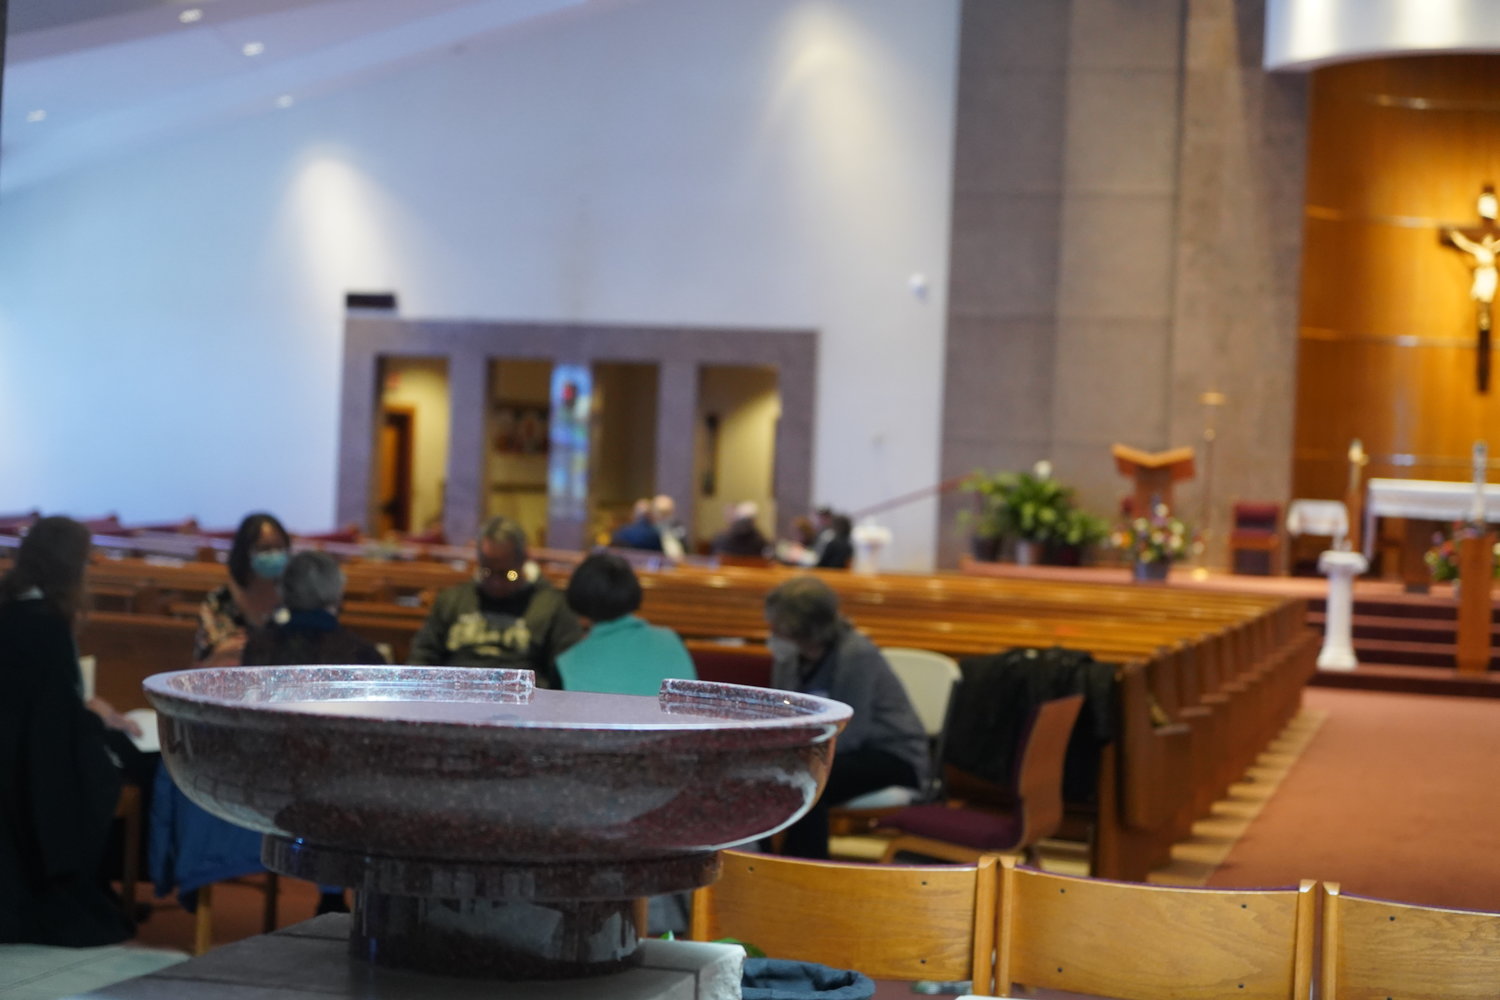 Two of the discussion groups participating in the Columbia listening session for the Synod of Bishops are seen from behind the holy water font in Our Lady of Lourdes Church.